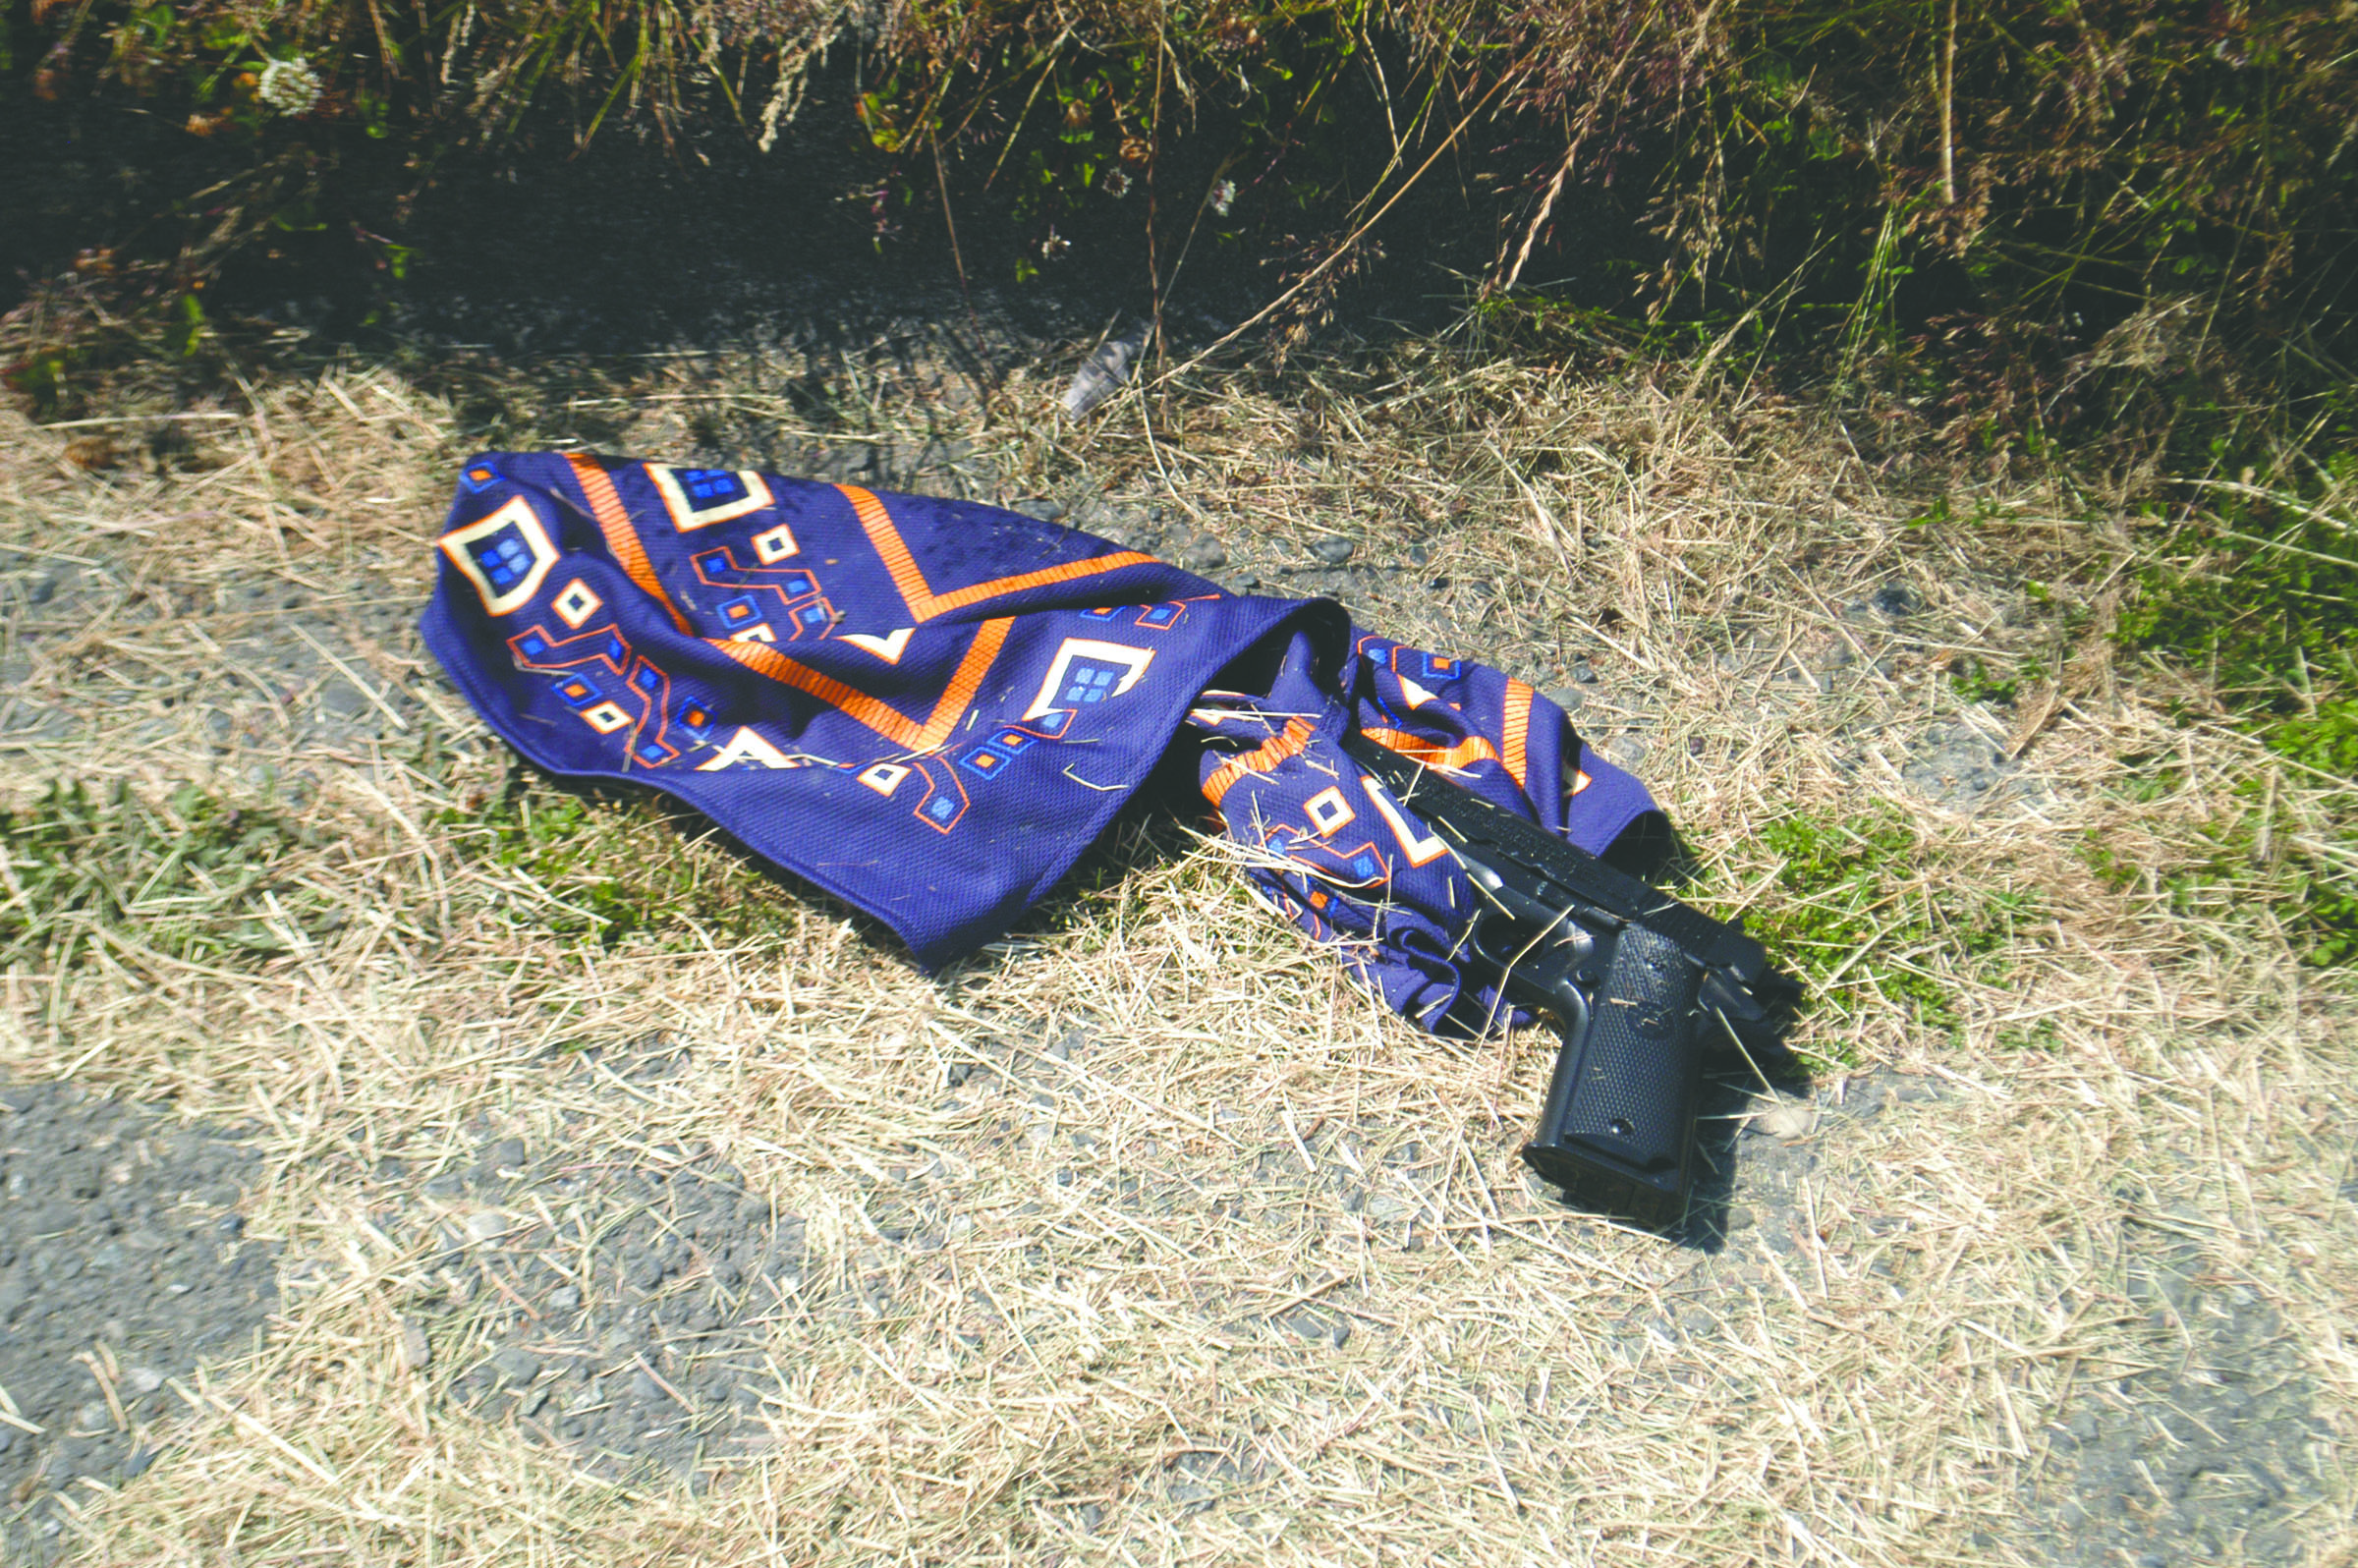 Plastic gun and scarf believed used by the robber. Rob Ollikainen/Peninsula Daily News